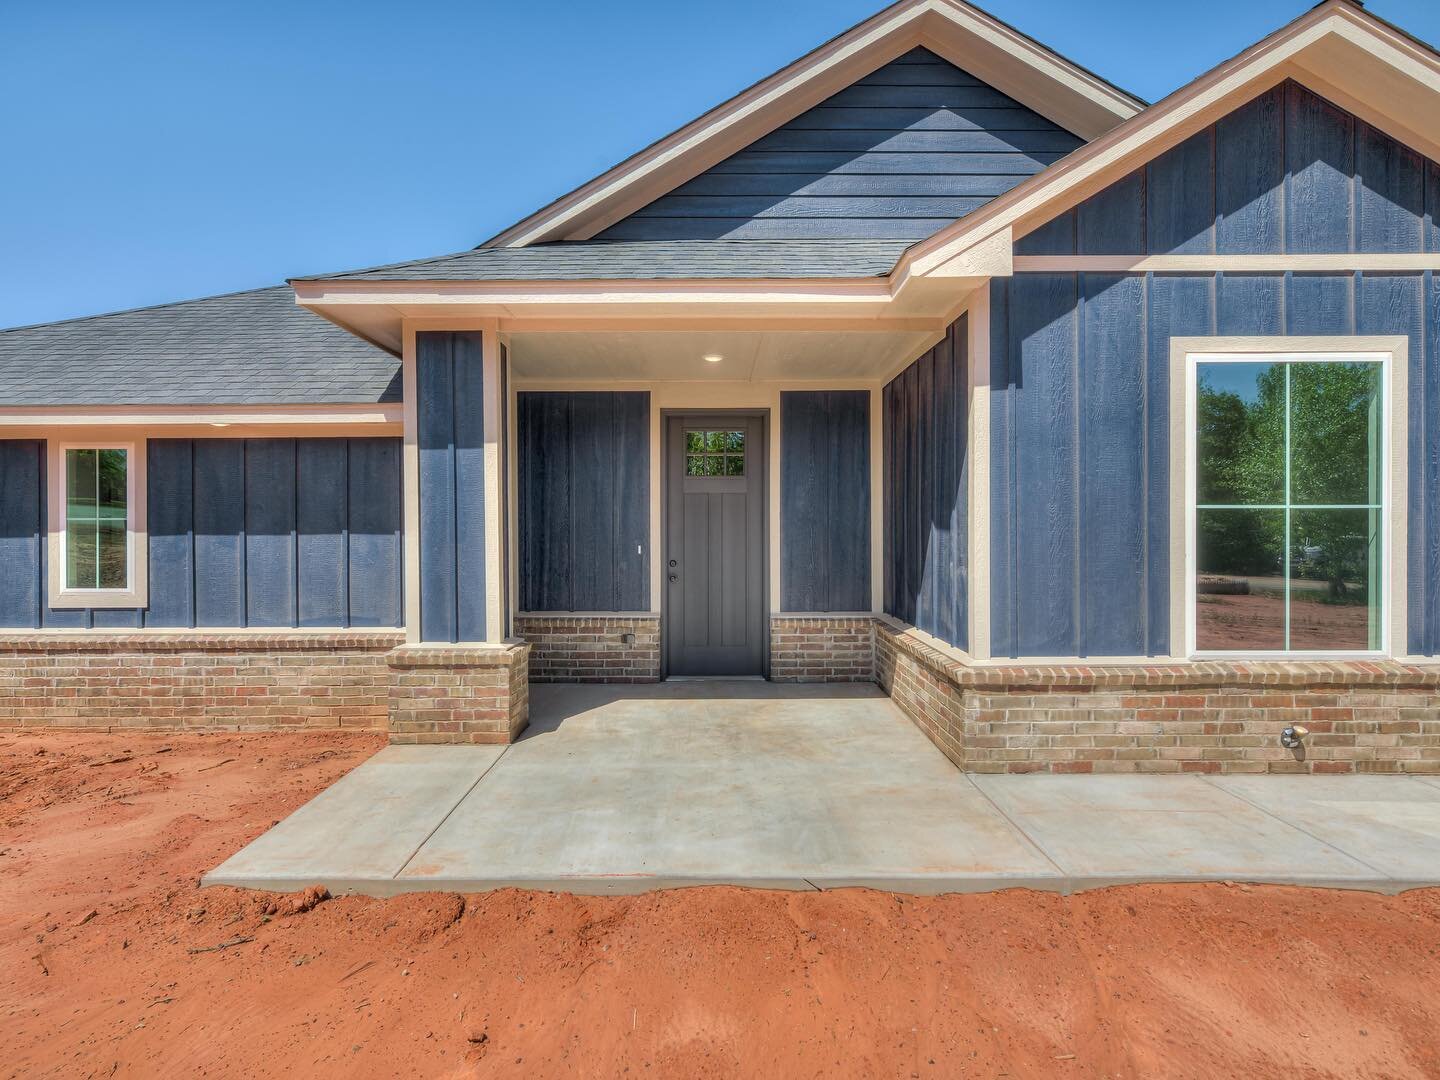 Stunning new designer home on one acre lot!

10301 Dove Crossing
Newalla, OK 

3 bedrooms / 2 bathrooms / 3 car garage with study. Listed at $409,900

Convenient access to I-40, Kickapoo Turnpike and Tinker

Contact Berry Sheffield for more informati